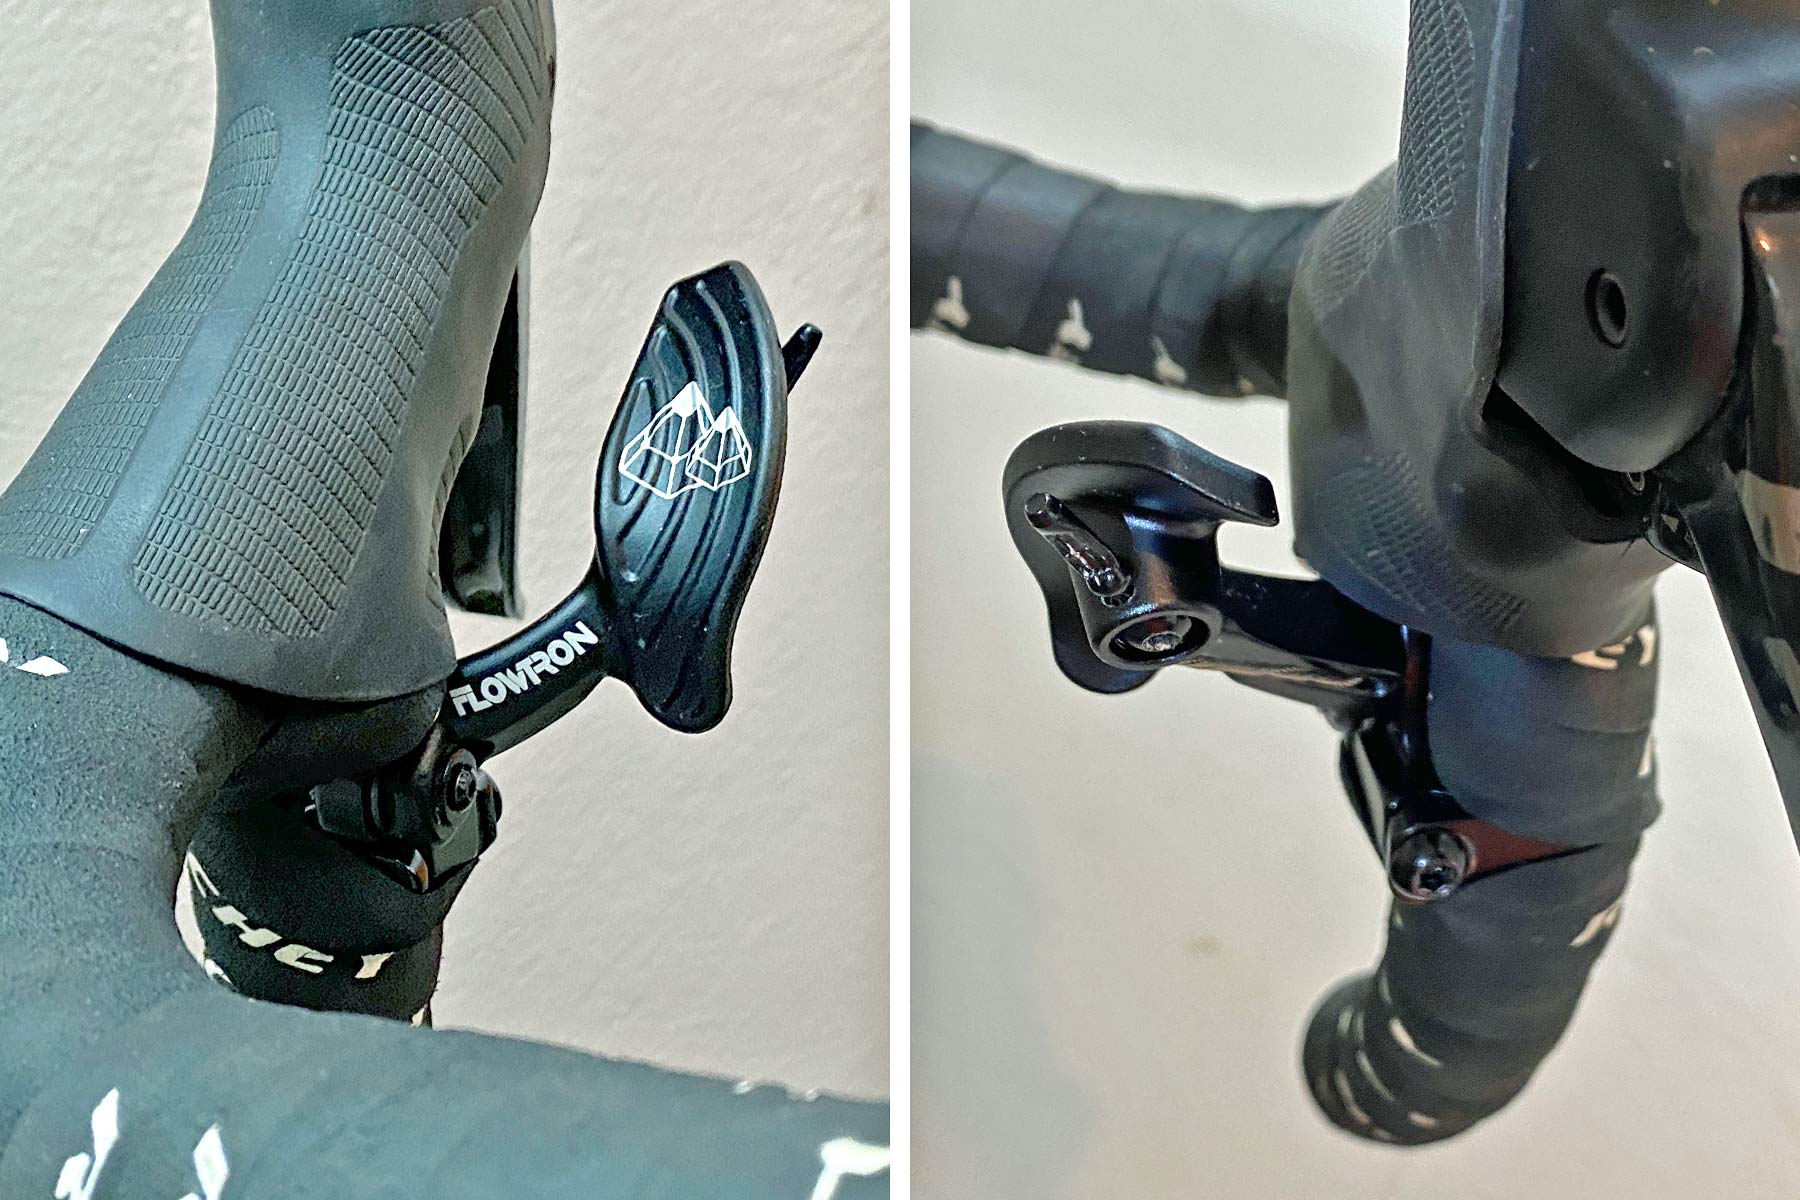 FSA Flowtron AGX gravel dropper post, First Look Review: 27.2mm internally routed dropper seatpost with dropbar remote, remote details